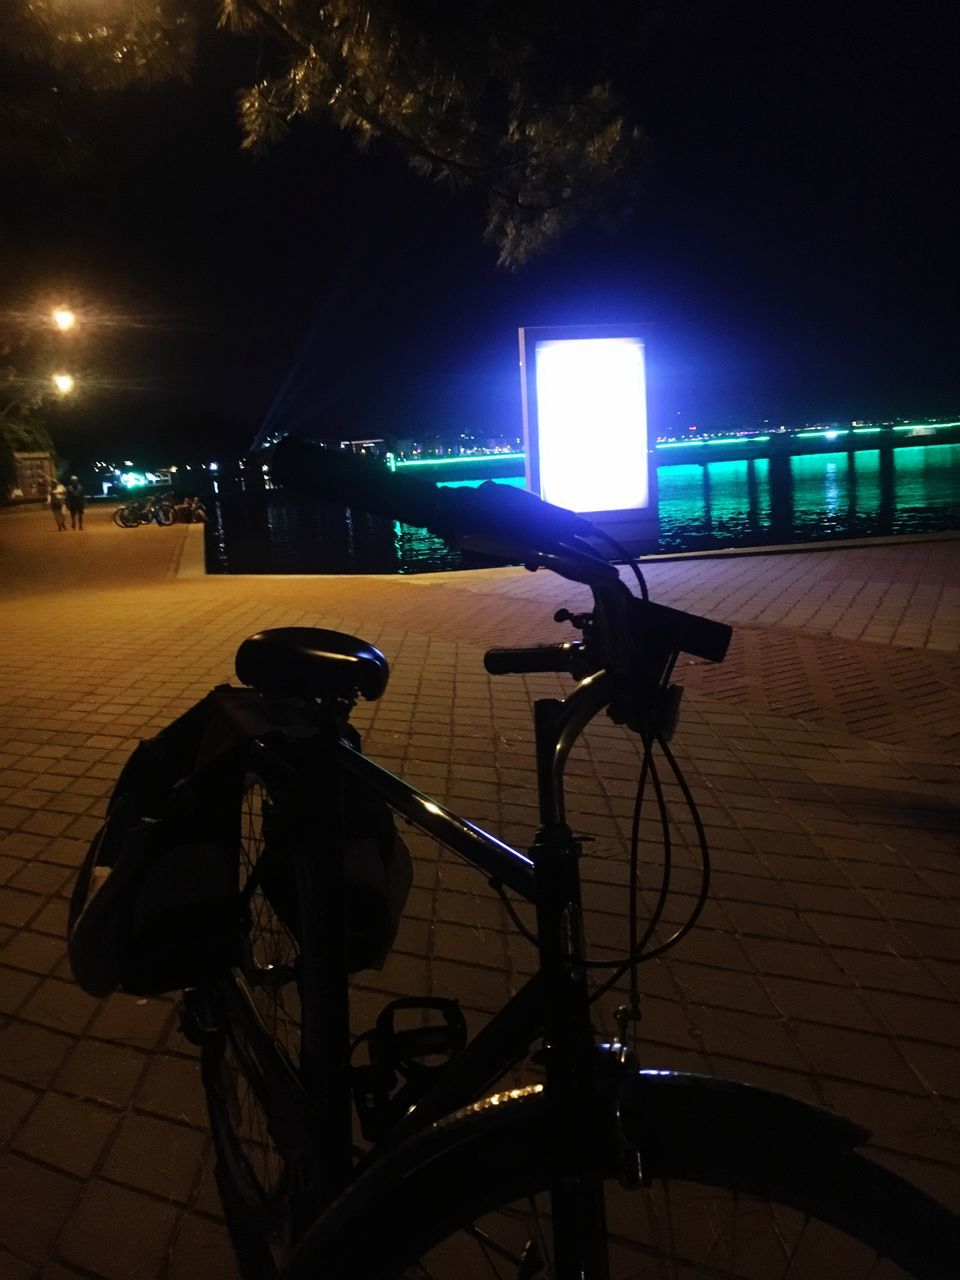 illuminated, night, city, bicycle, street, transportation, mode of transportation, land vehicle, no people, architecture, technology, lighting equipment, building exterior, stationary, built structure, nature, outdoors, light - natural phenomenon, sky, parking, light